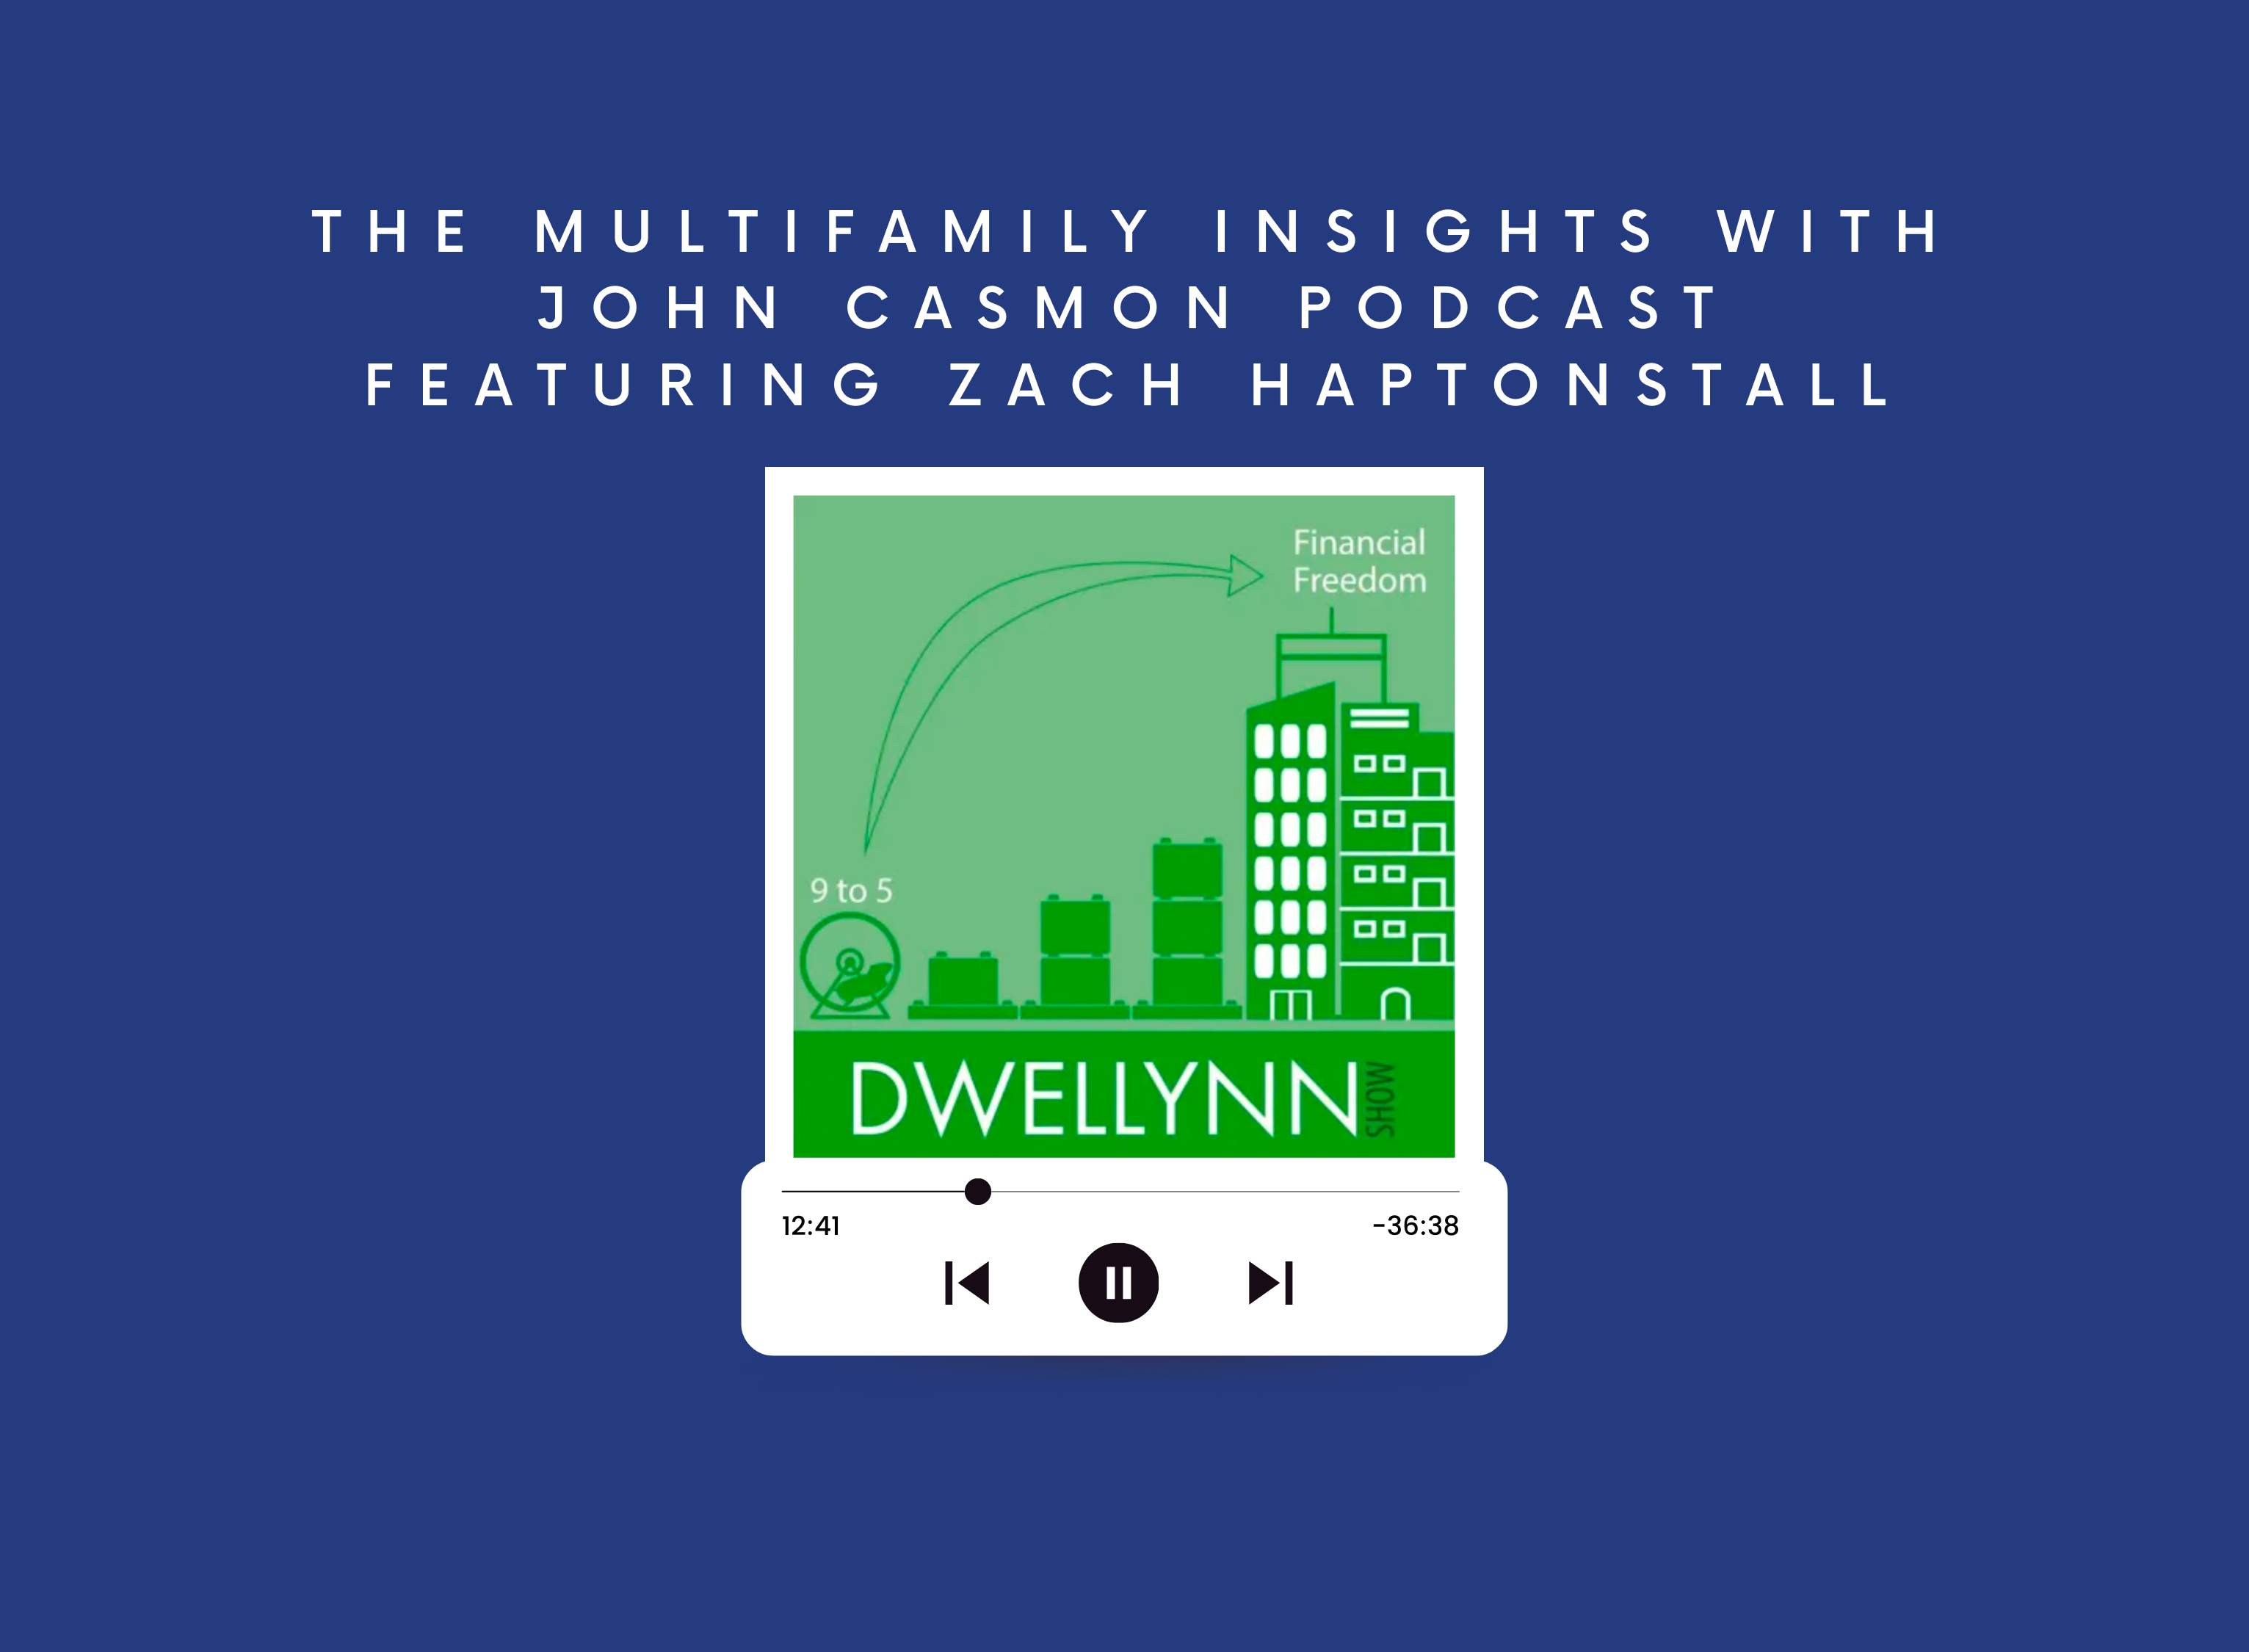 The Multifamily Insights with John Casmon Podcast